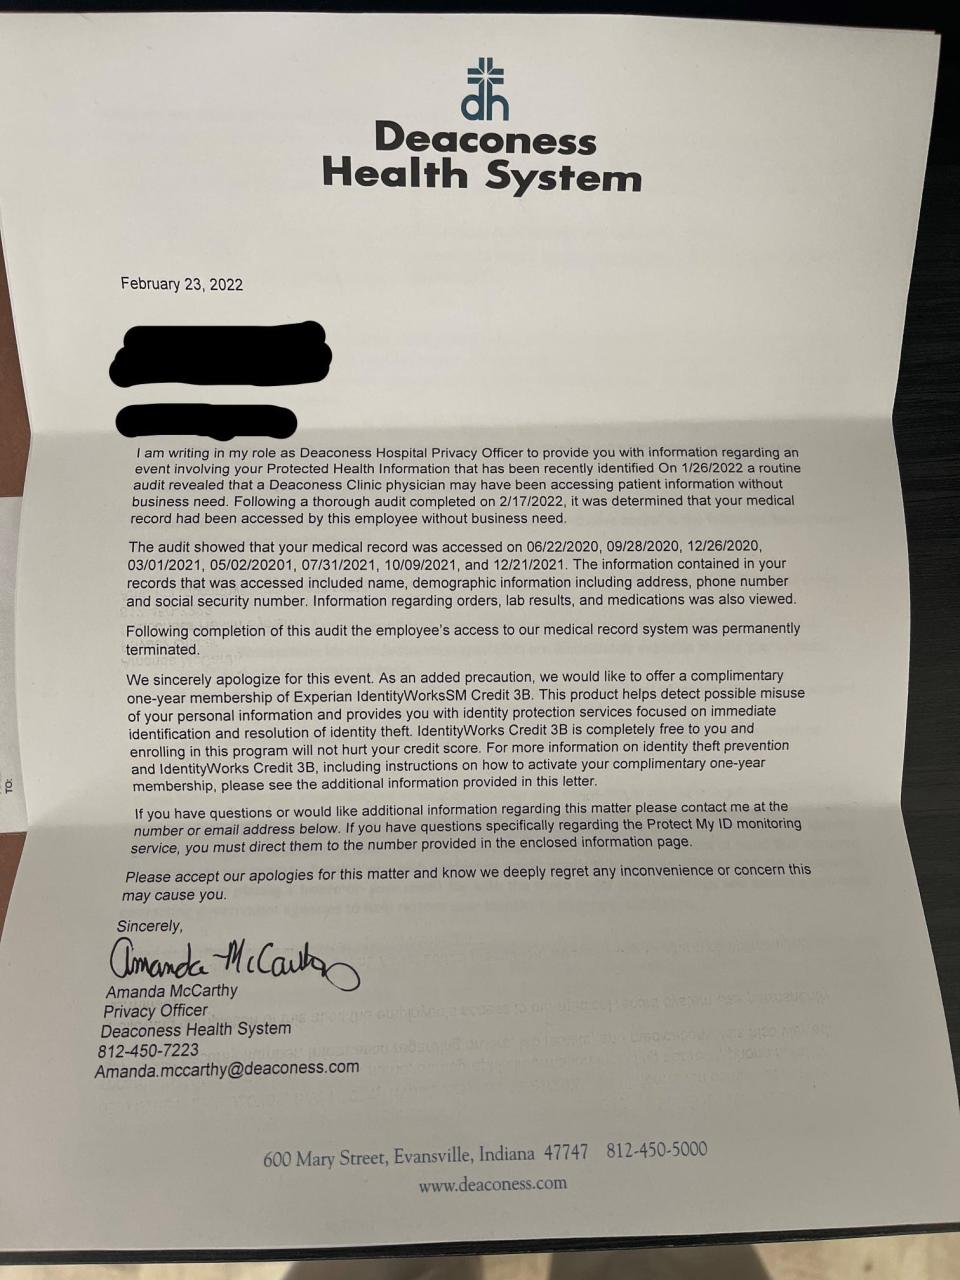 An Indianapolis law firm said it is pursuing claims on behalf of local women who received this letter from Deaconess Health System notifying them their personal medical records were accessed.